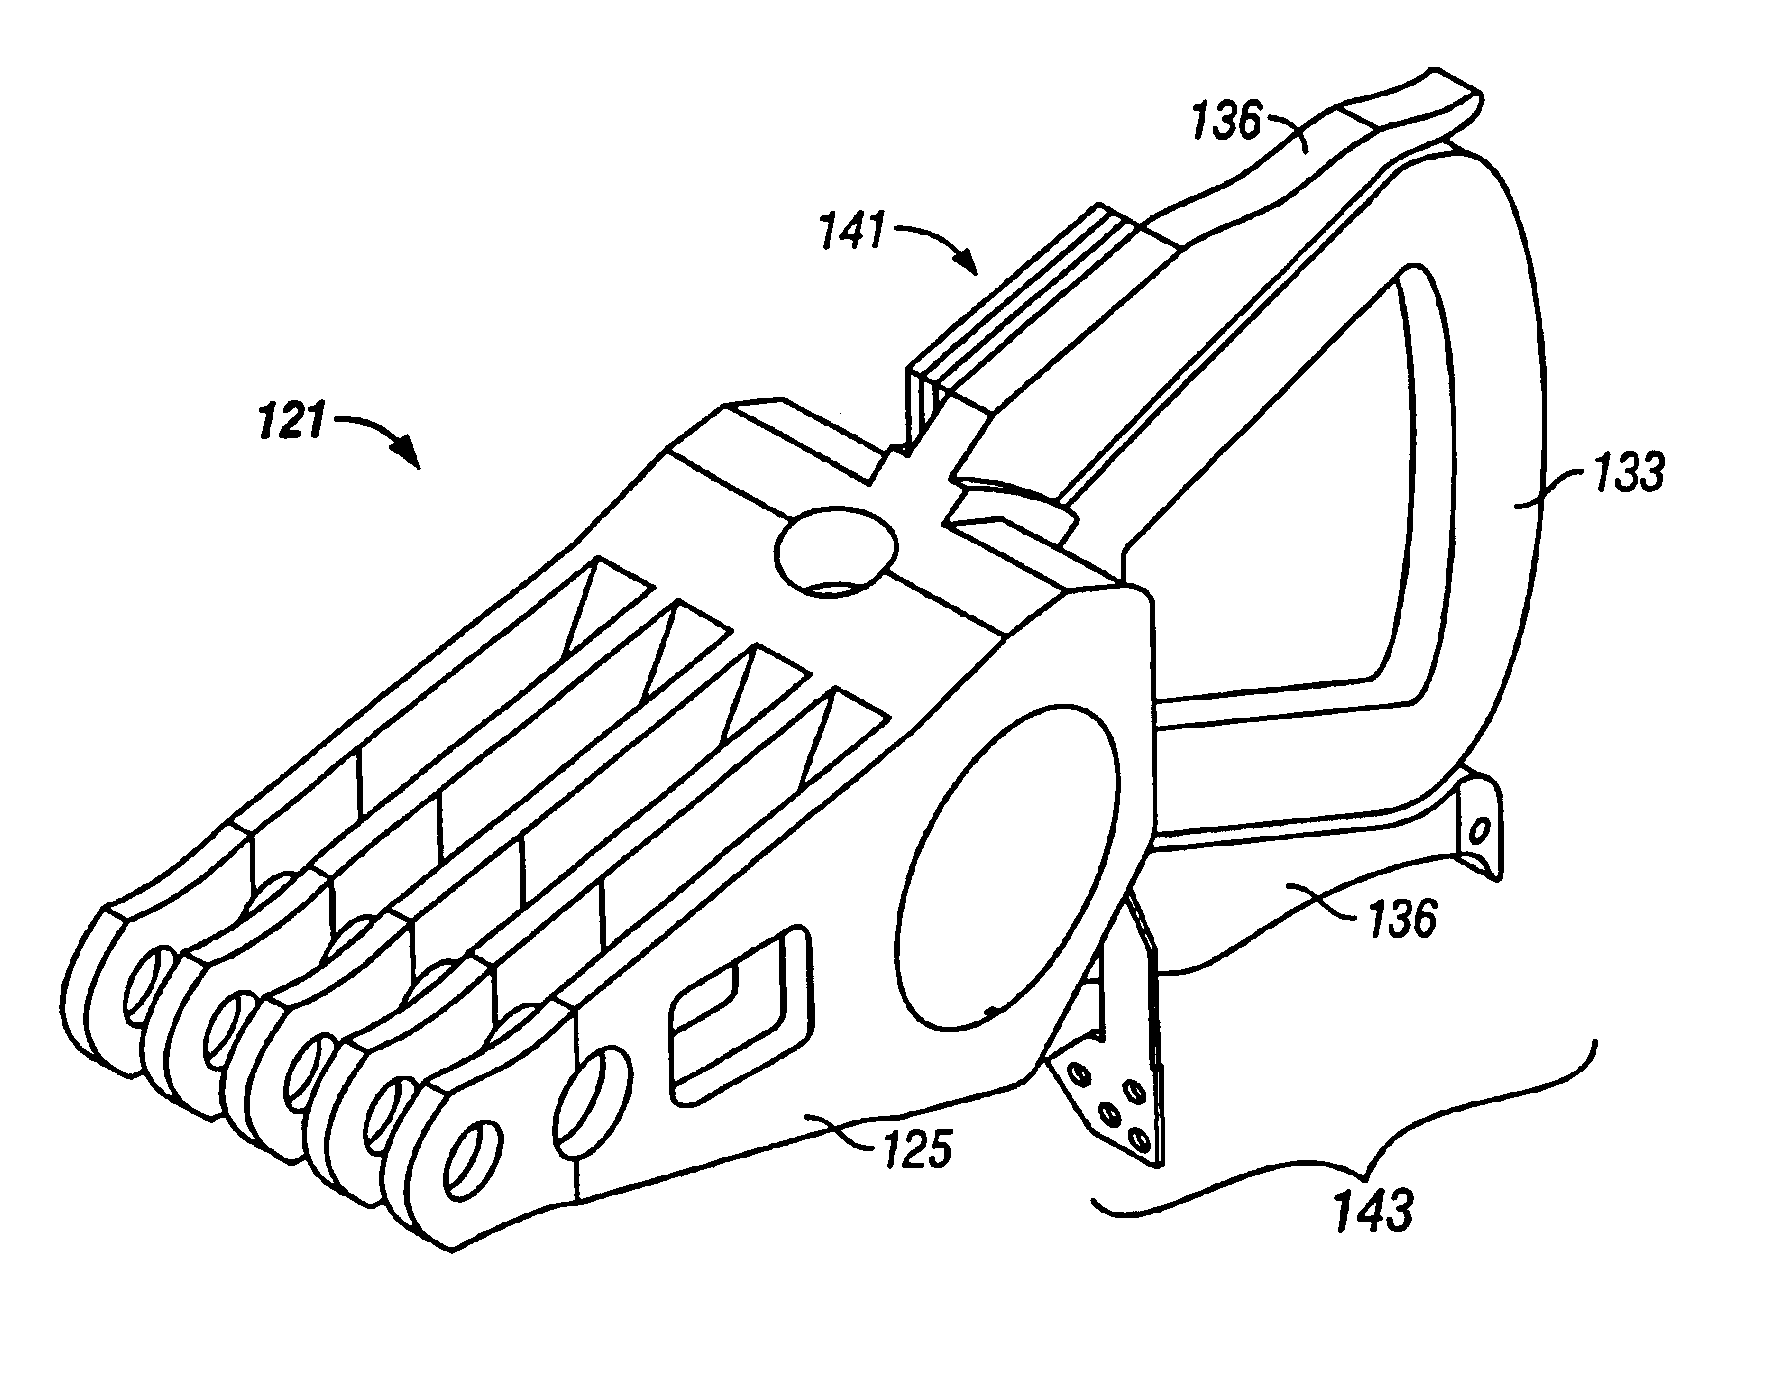 System and method of damping vibration on coil supports in high performance disk drives with rotary actuators